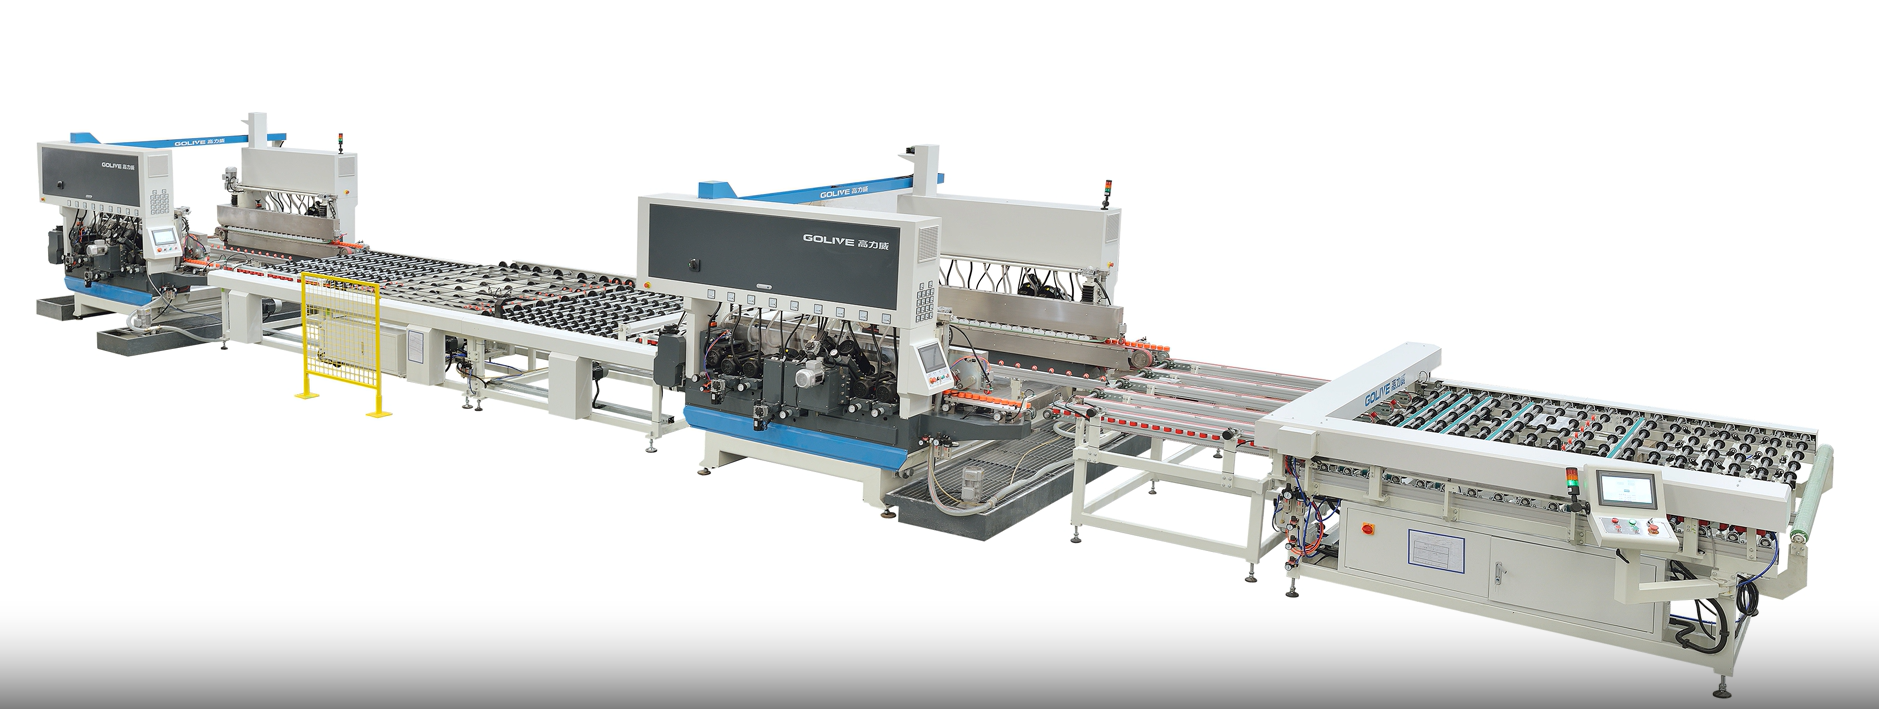 Golive cutting and grinding production line